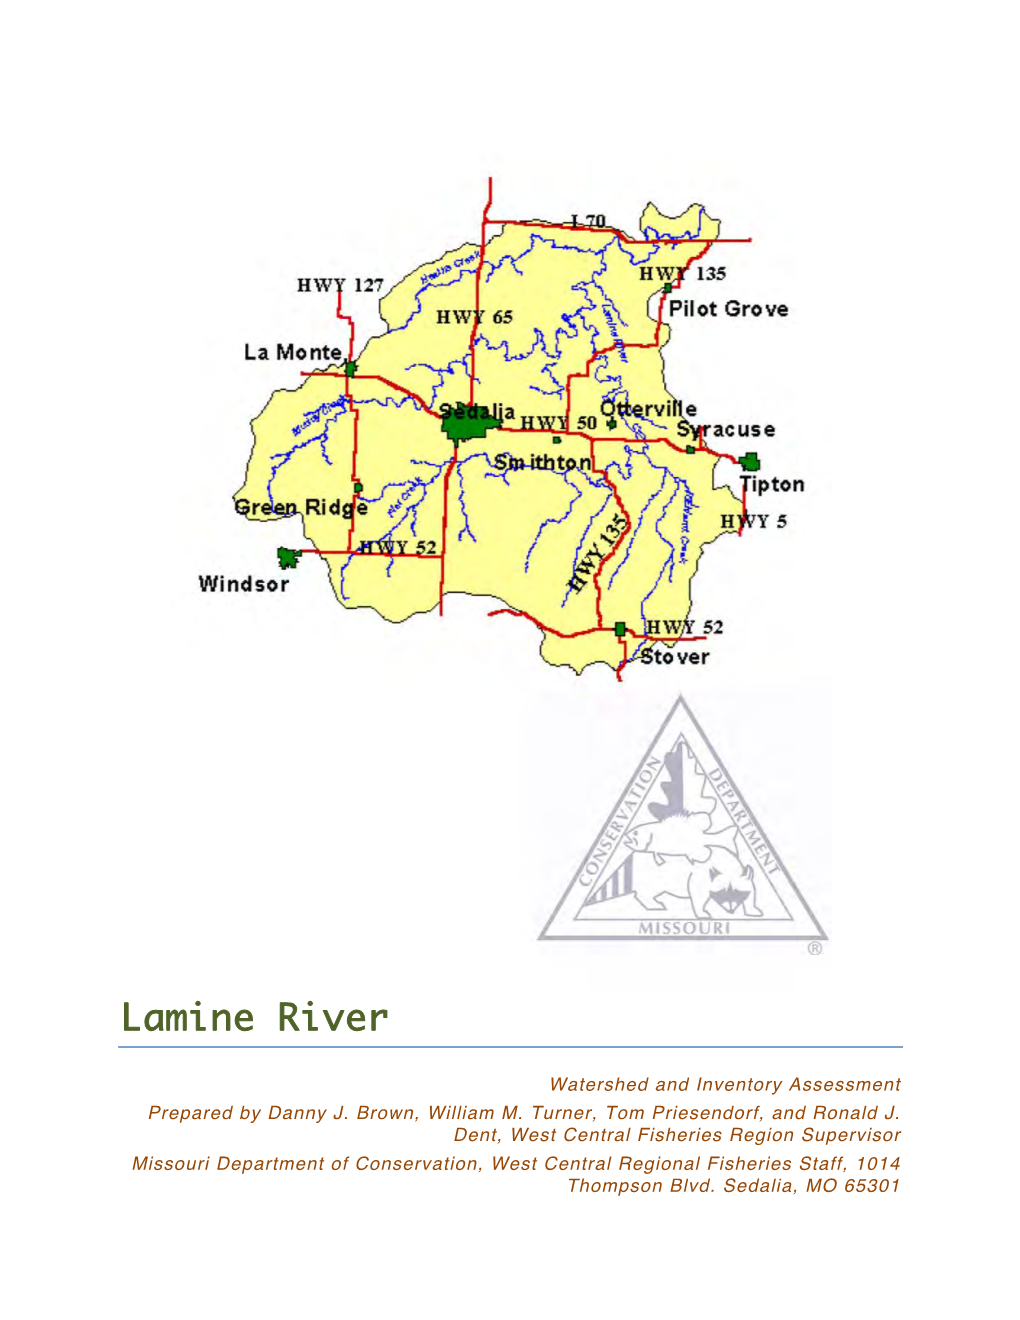 Lamine River Watershed and Inventory Assessment